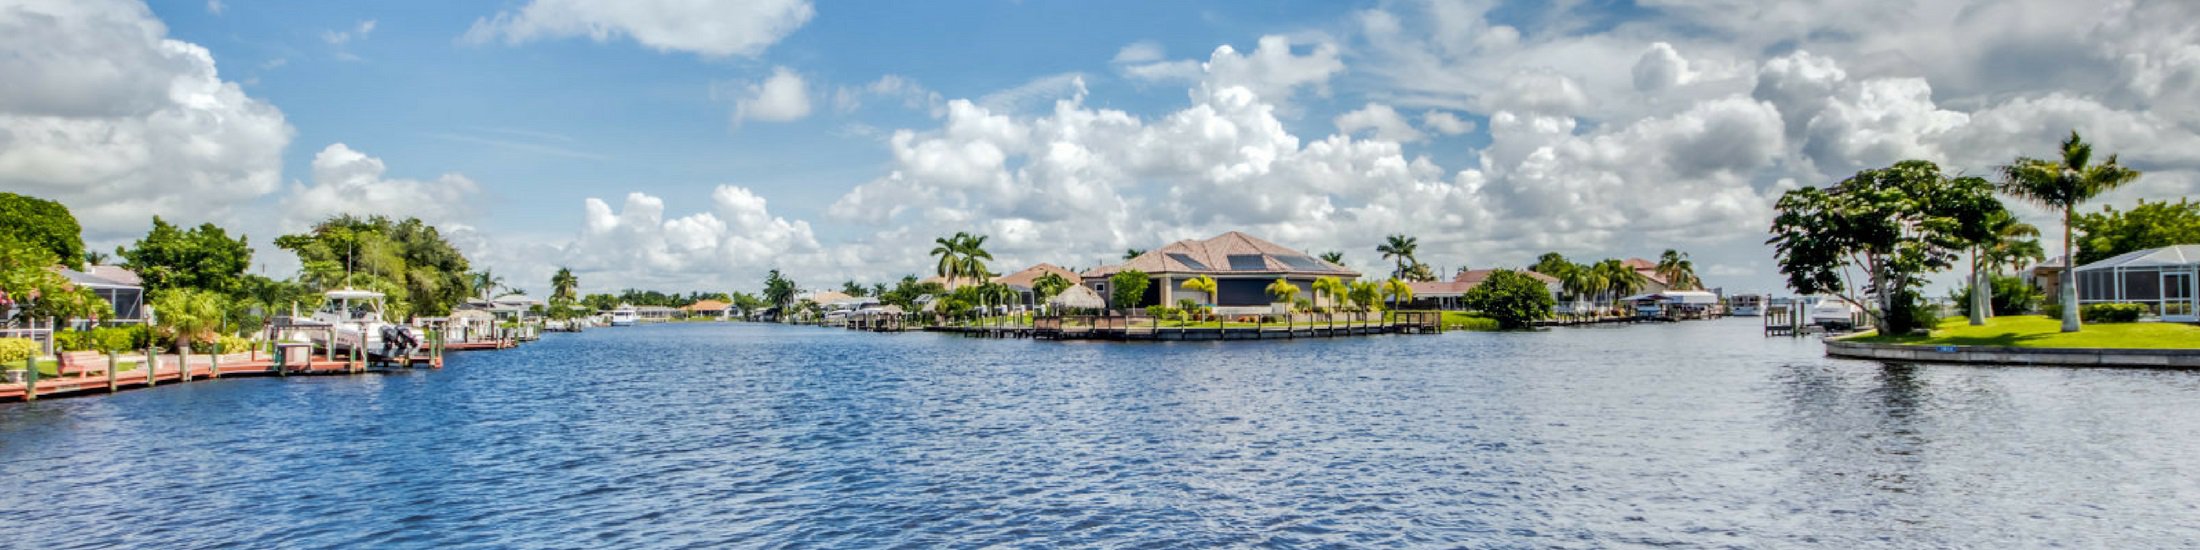 Four Mile Cove Homes for Sale